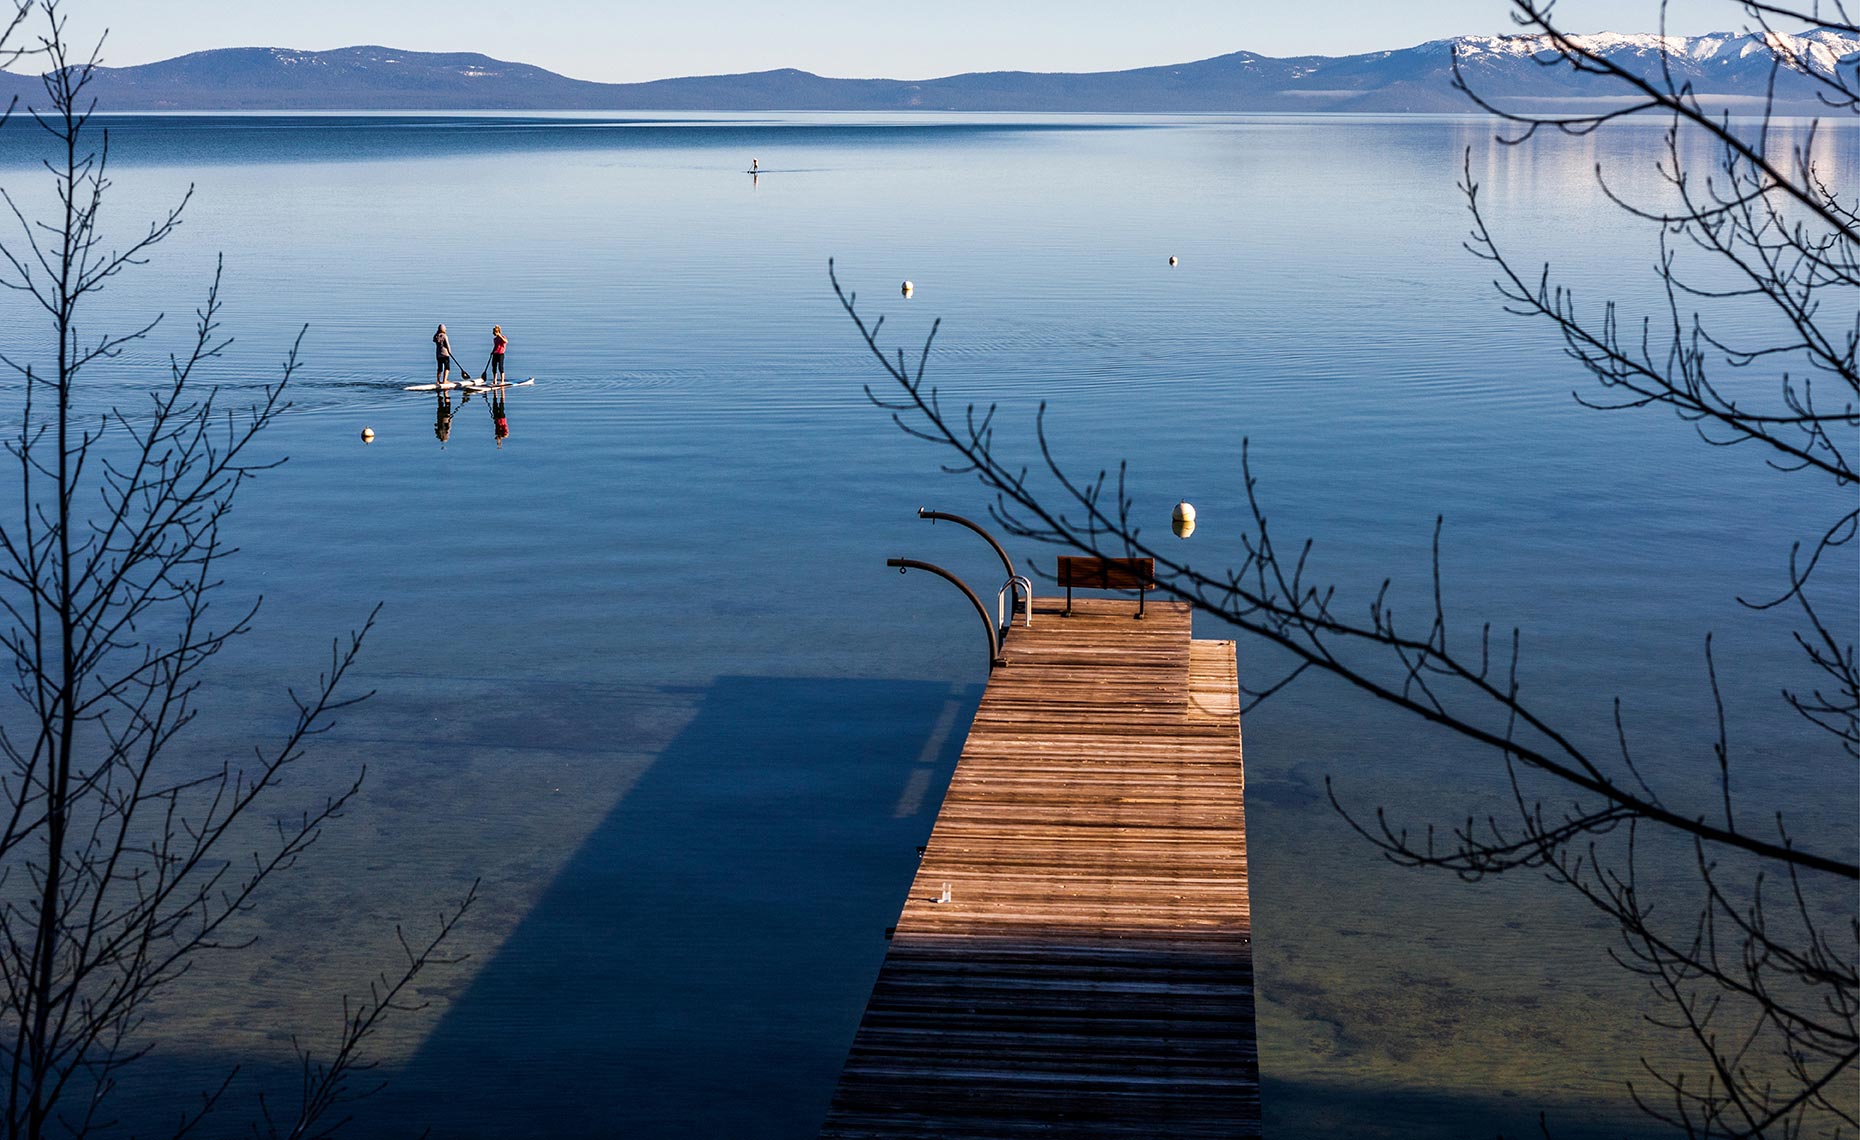 06_SUP_Stand_Up_Paddle_South_Lake_Tahoe_California_Environment_Landscape_Chris_Wellhausen_Photography.JPG